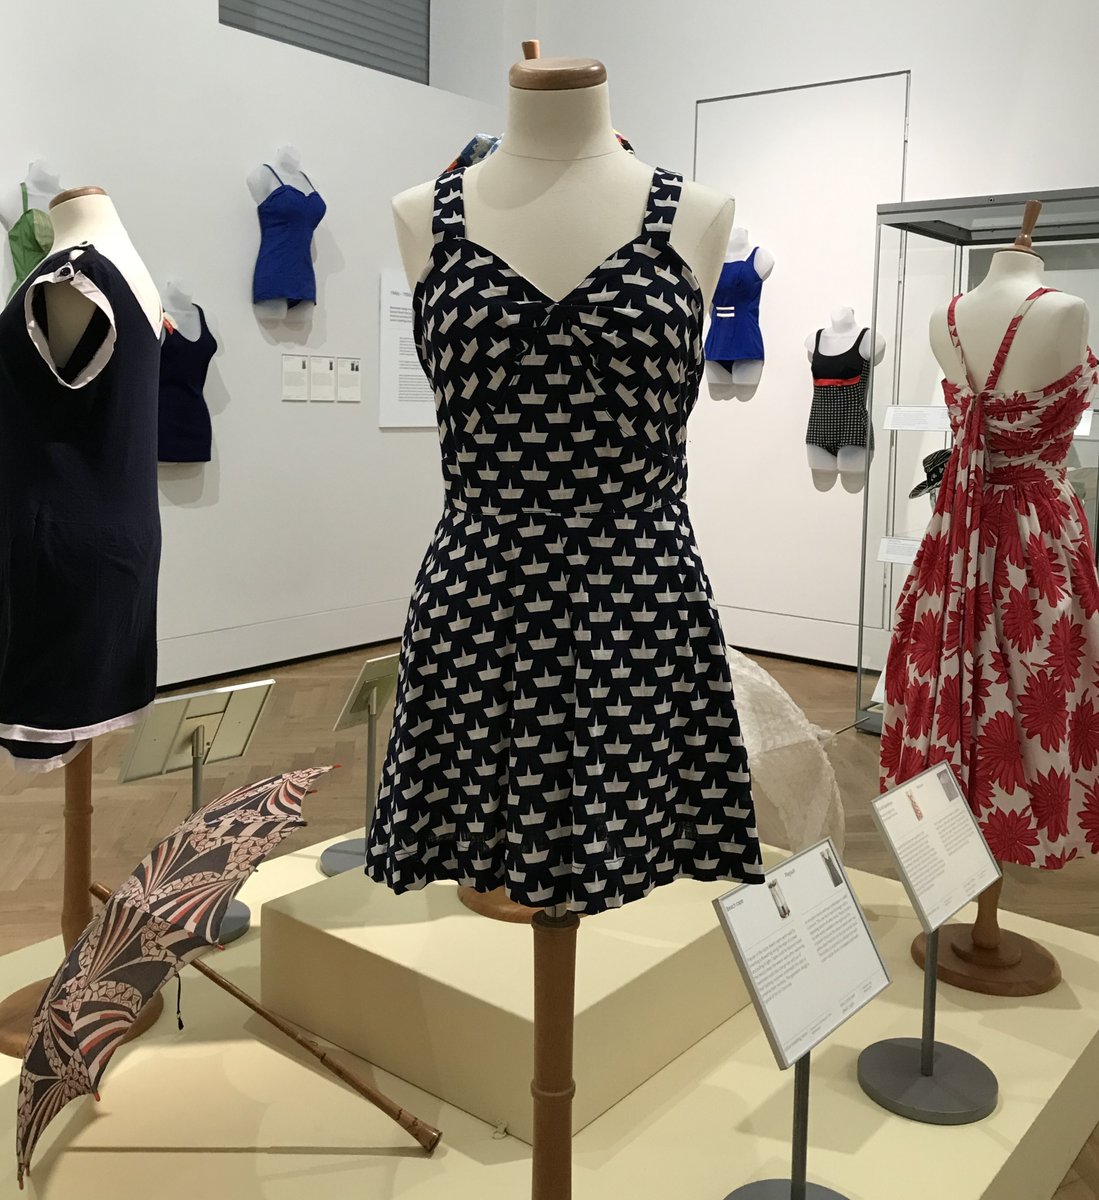 The excellent #dresshistory exhibition, titled, Making a Splash! A Century of Women's Beachwear, is well worth the visit! Exhibition runs till 14 January 2024. Free entry at Aberdeen Art Gallery.

@AbdnArtMuseums #aberdeen #textilehistory #fashionhistory #dresshistorians